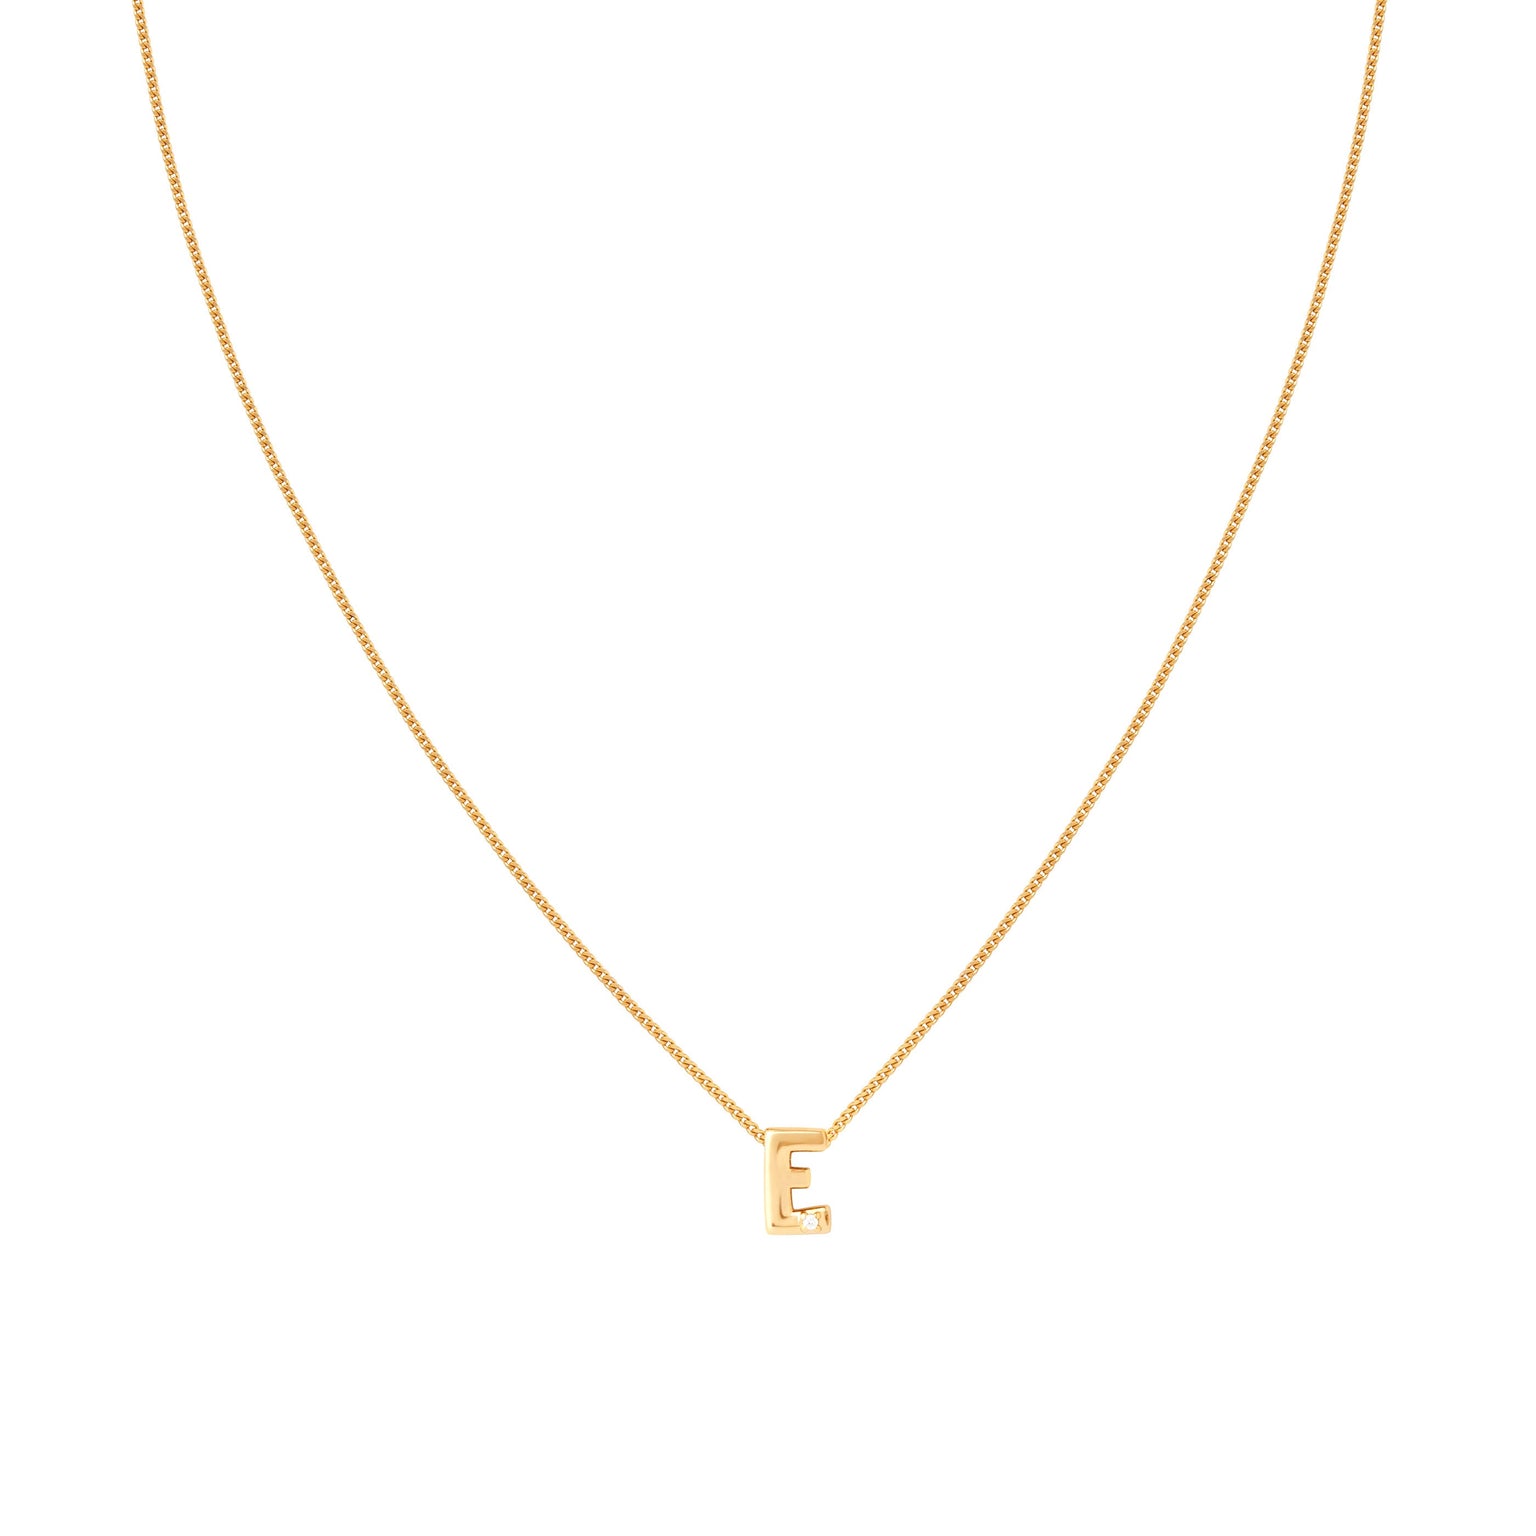 E Initial Pendant Necklace in Gold